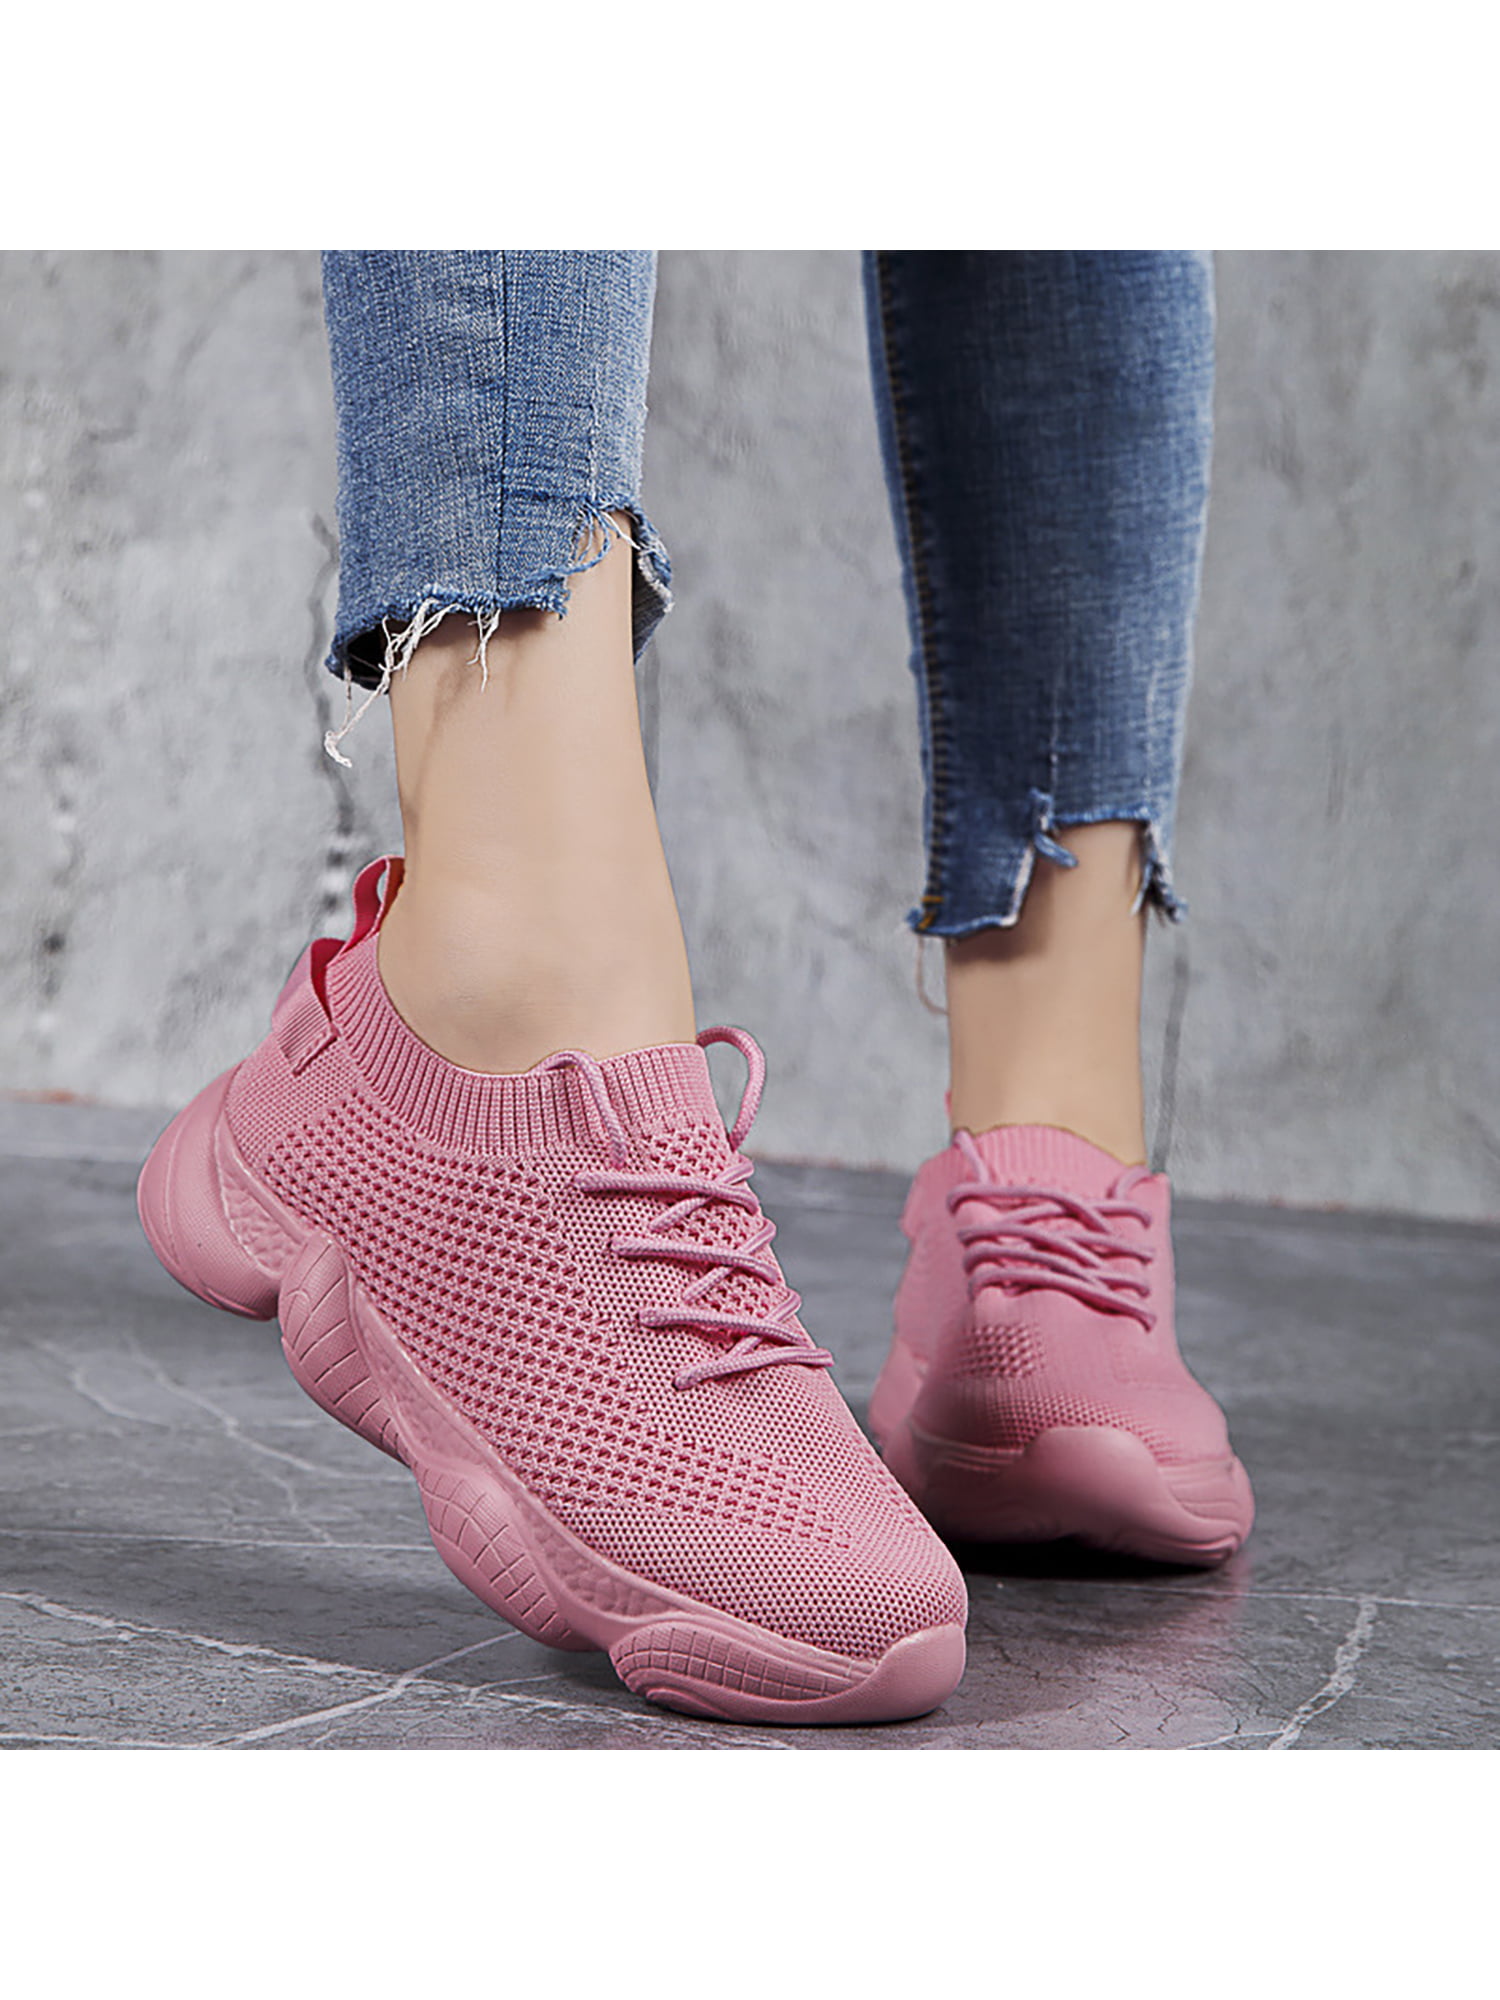 Women's Trainers Casual Sport Running Sneakers Tennis Shoes Breathable Pink